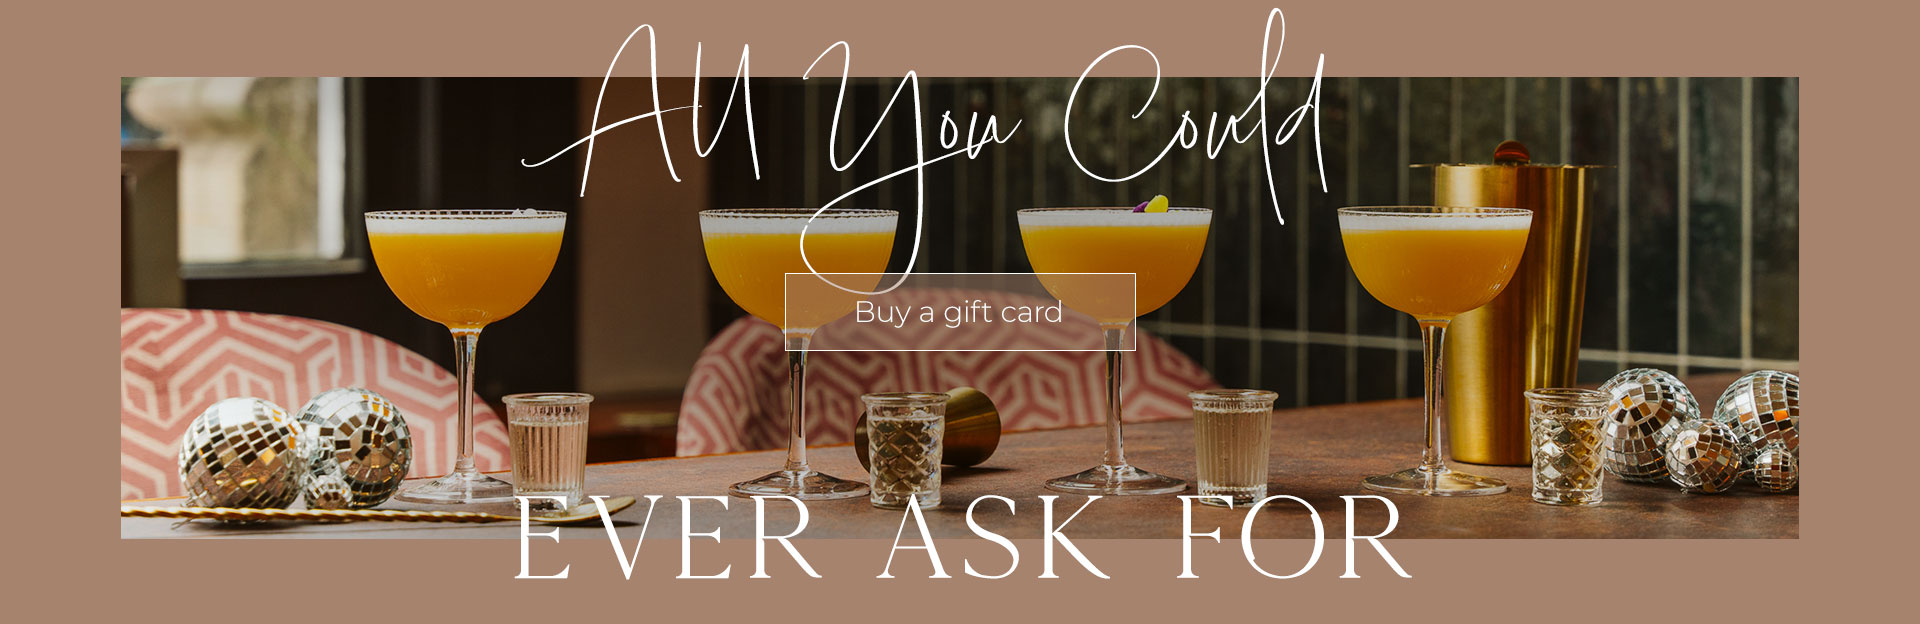 All Bar One Gift Cards at All Bar One New Oxford Street